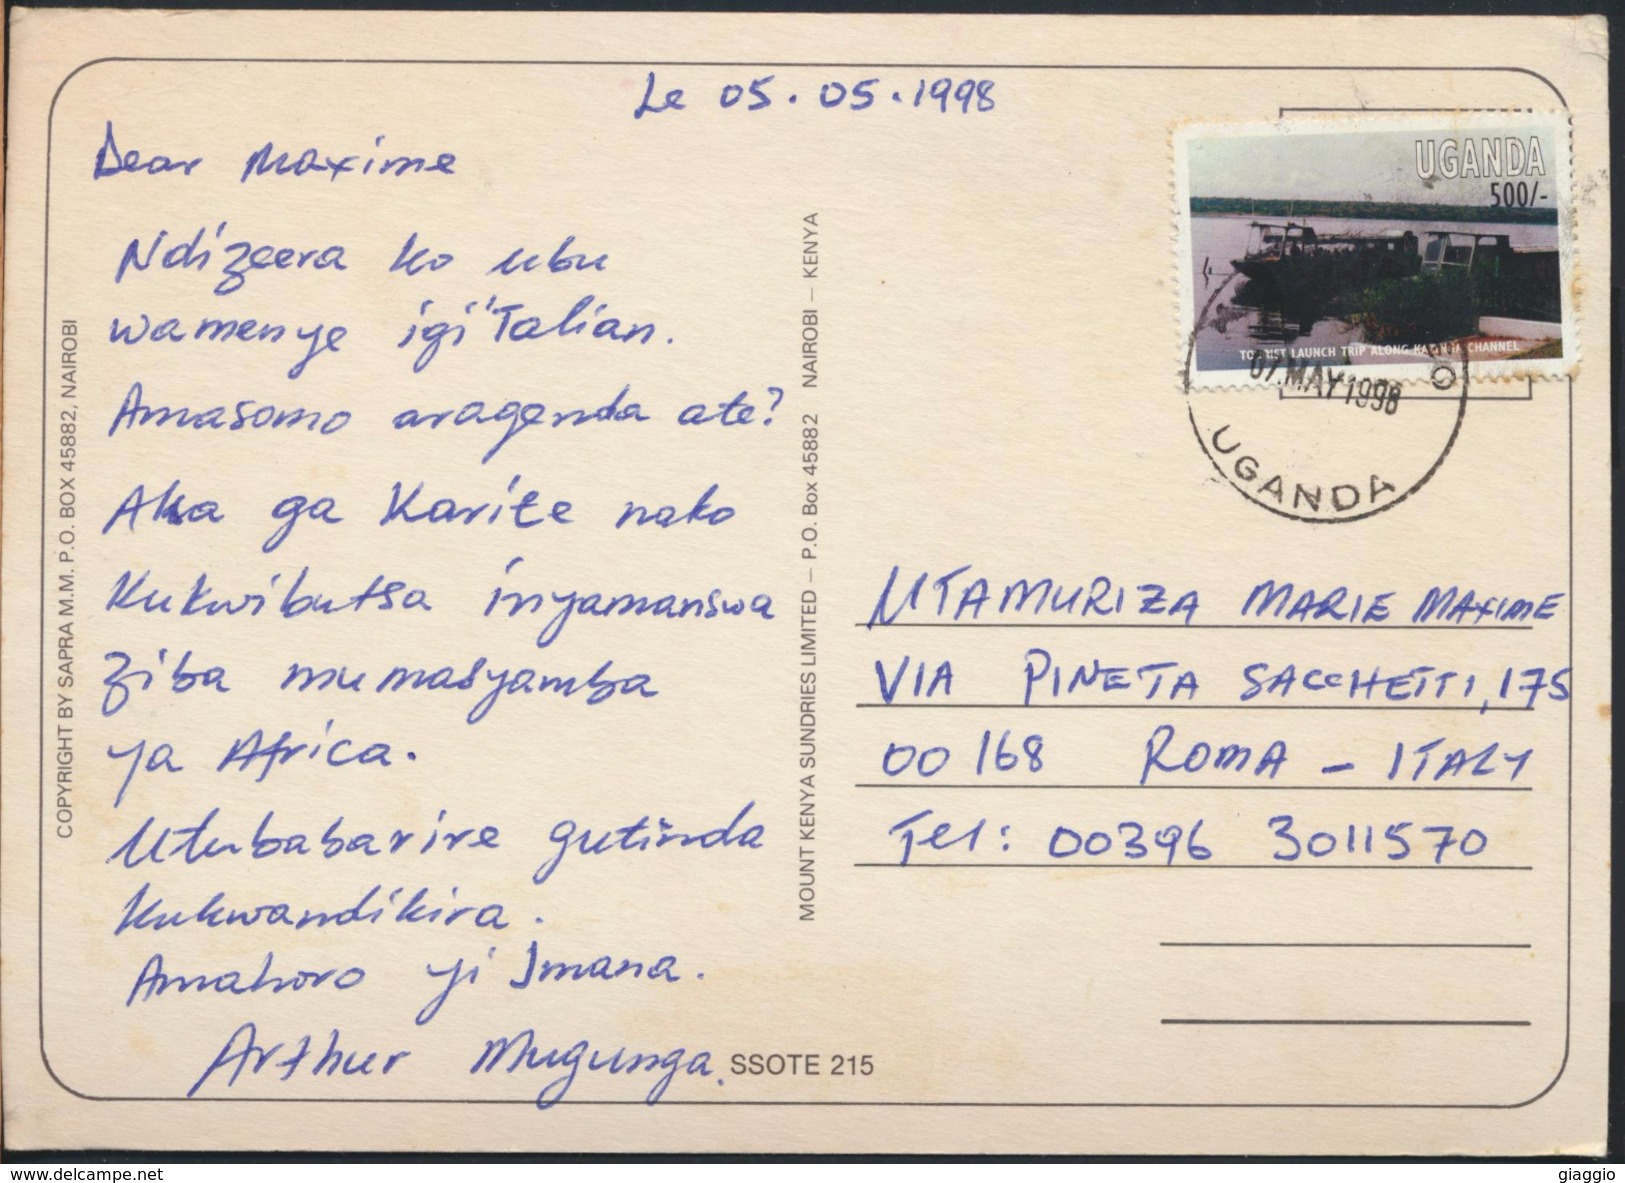 °°° GF239 - UGANDA - OUT OF AFRICA - 1998 With Stamps °°° - Ouganda